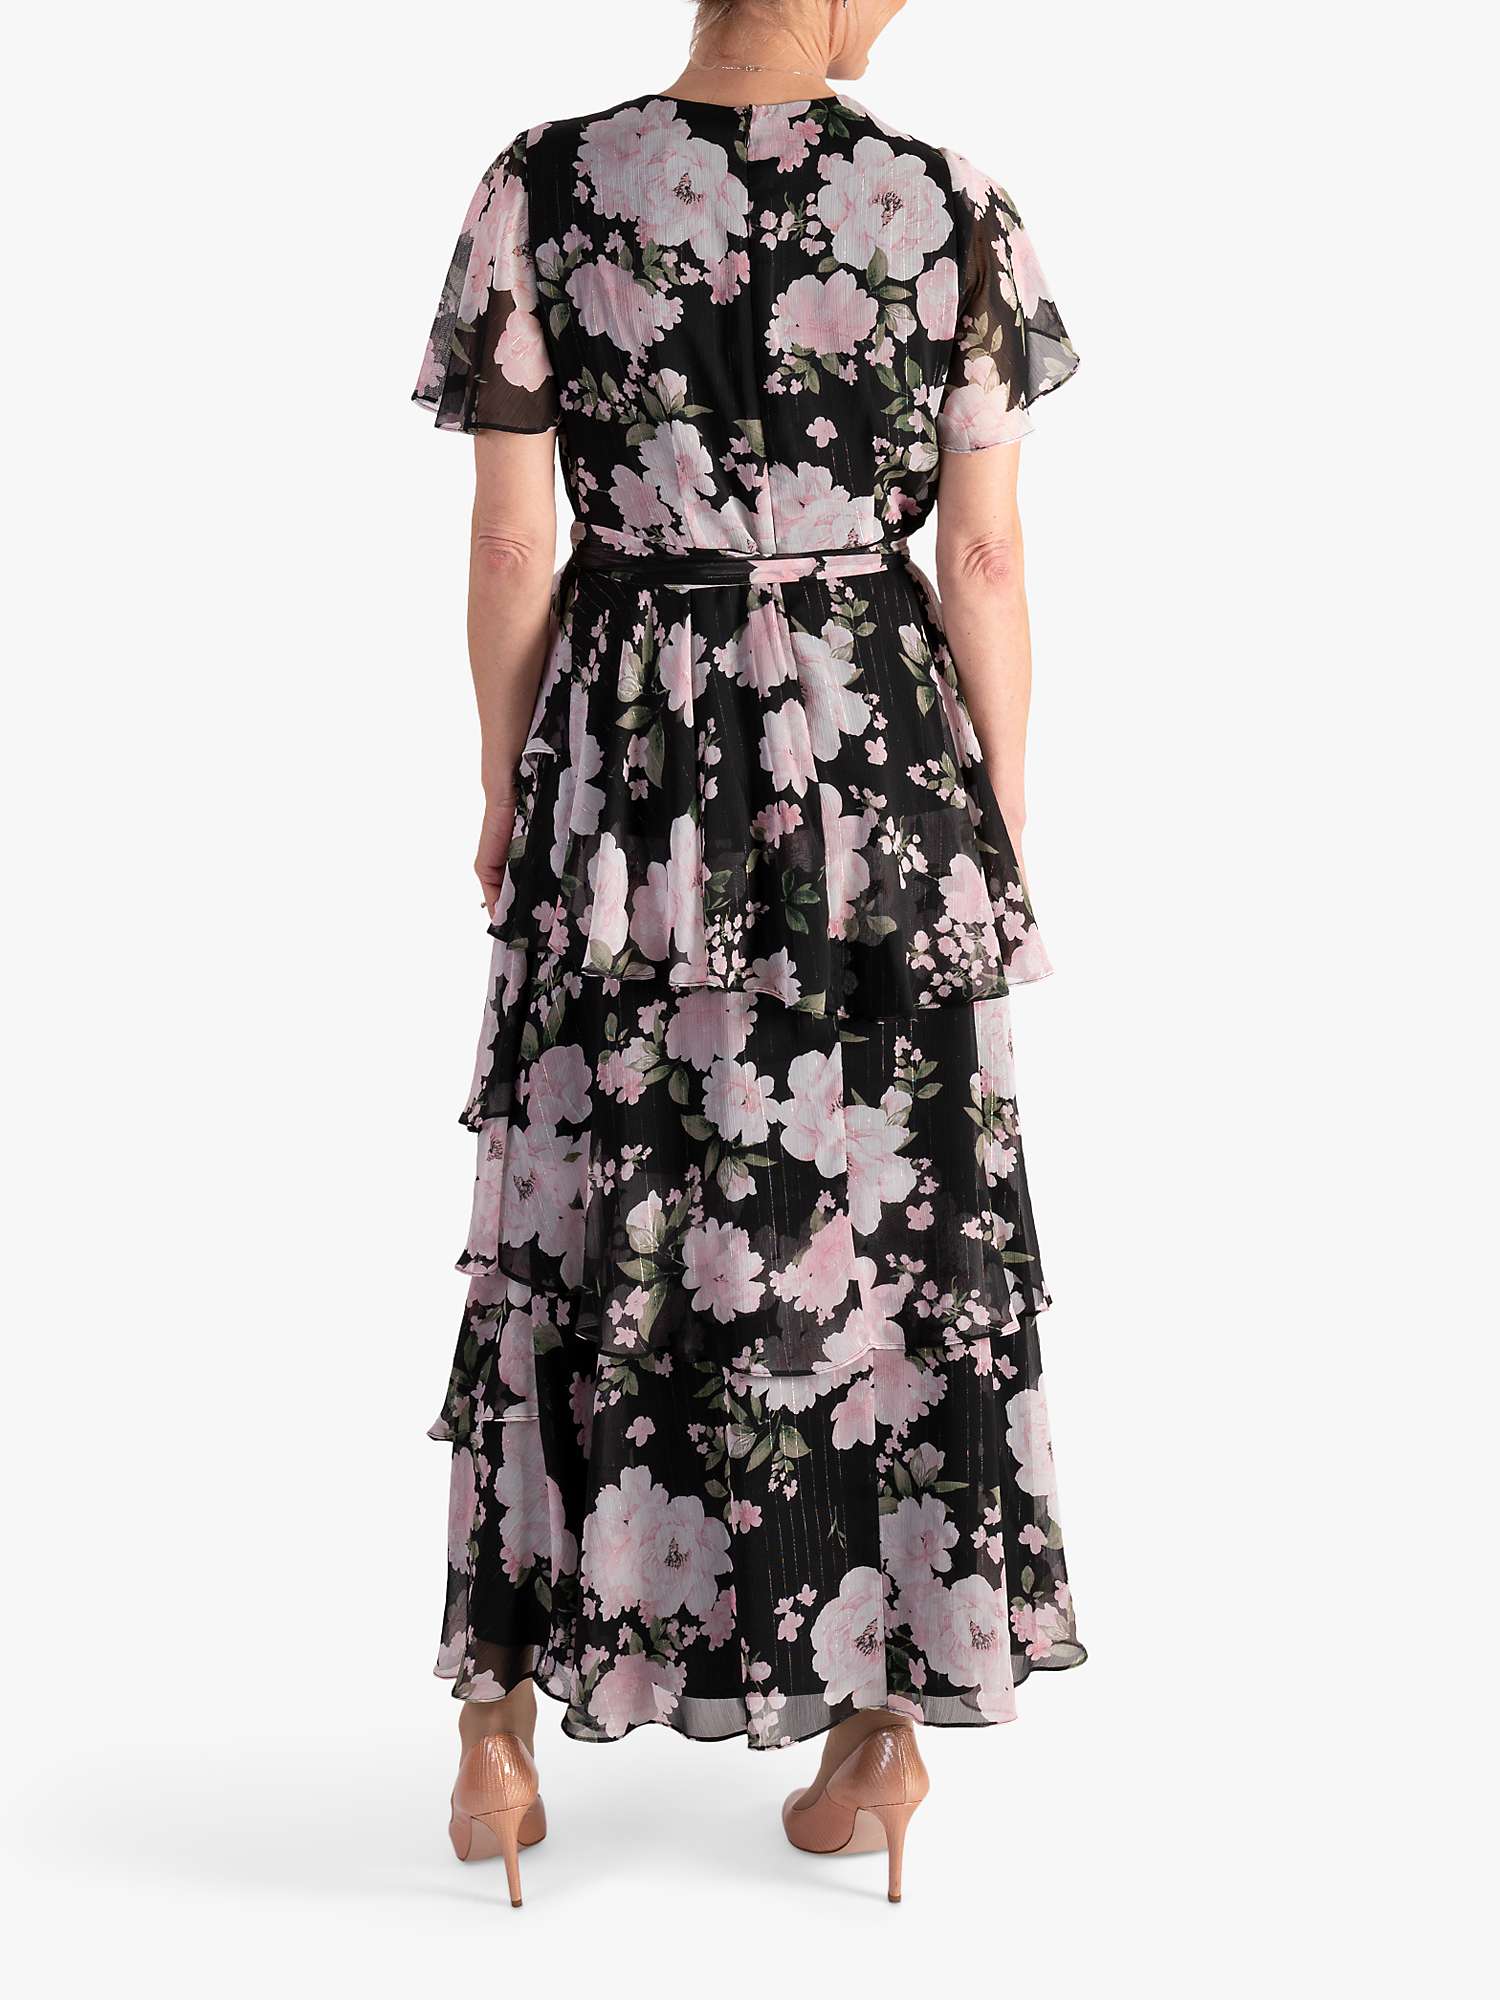 Buy chesca Wild Rose Print Tiered Chiffon Maxi Dress, Black/Pink Online at johnlewis.com